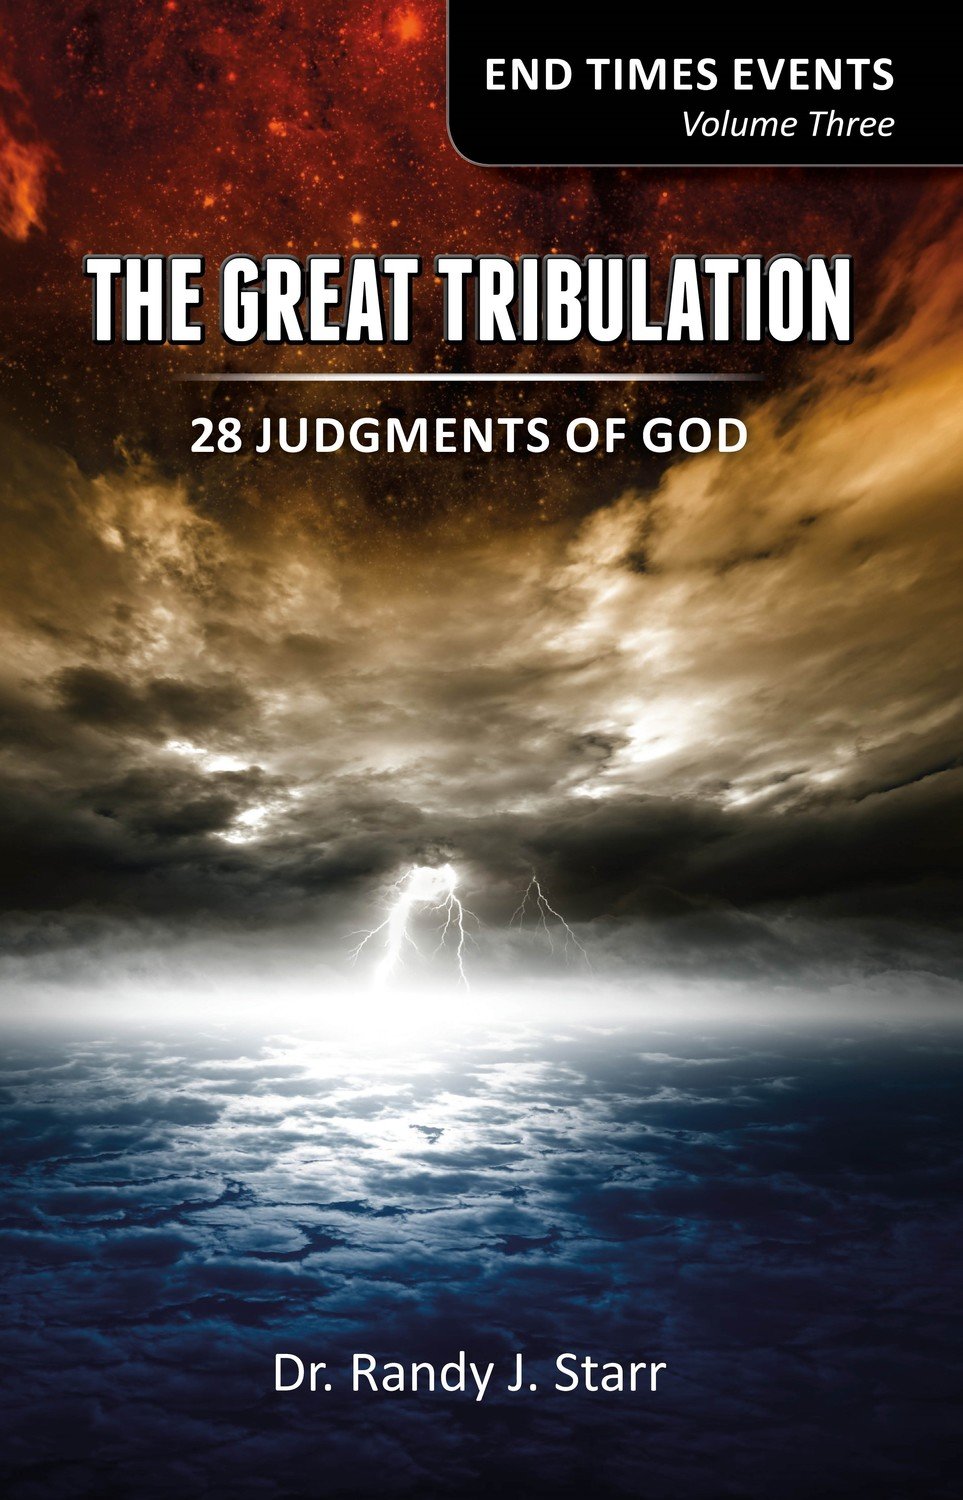 End Time Events volume 3 - The Great Tribulation -28 Judgments